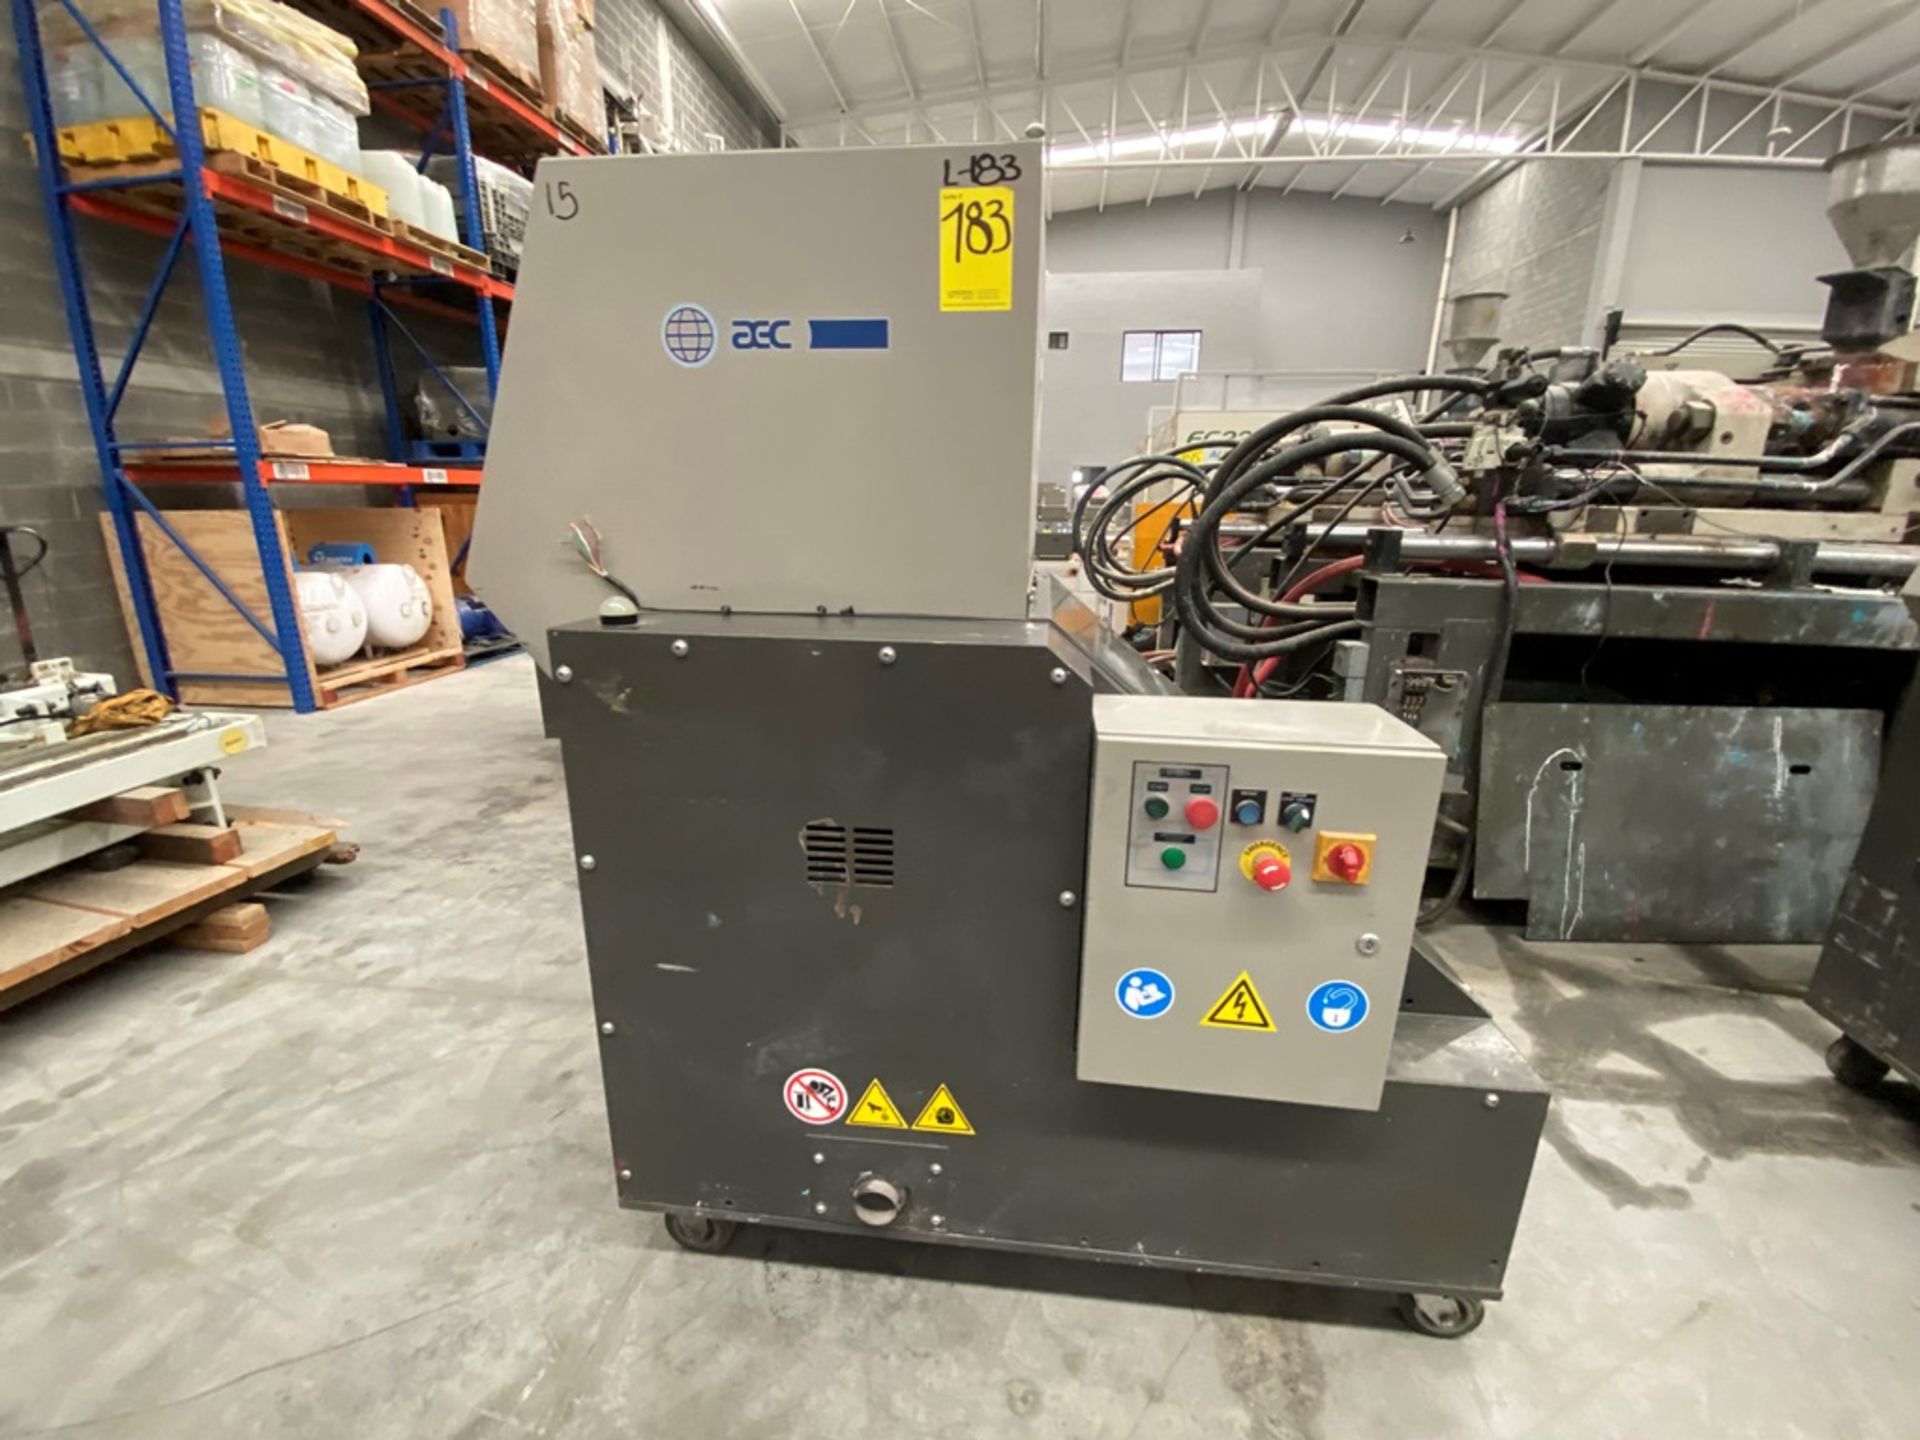 AEC Granulator for plastic of 25 HP, year 2016 current 460V/60Hz 3PH - Image 31 of 36